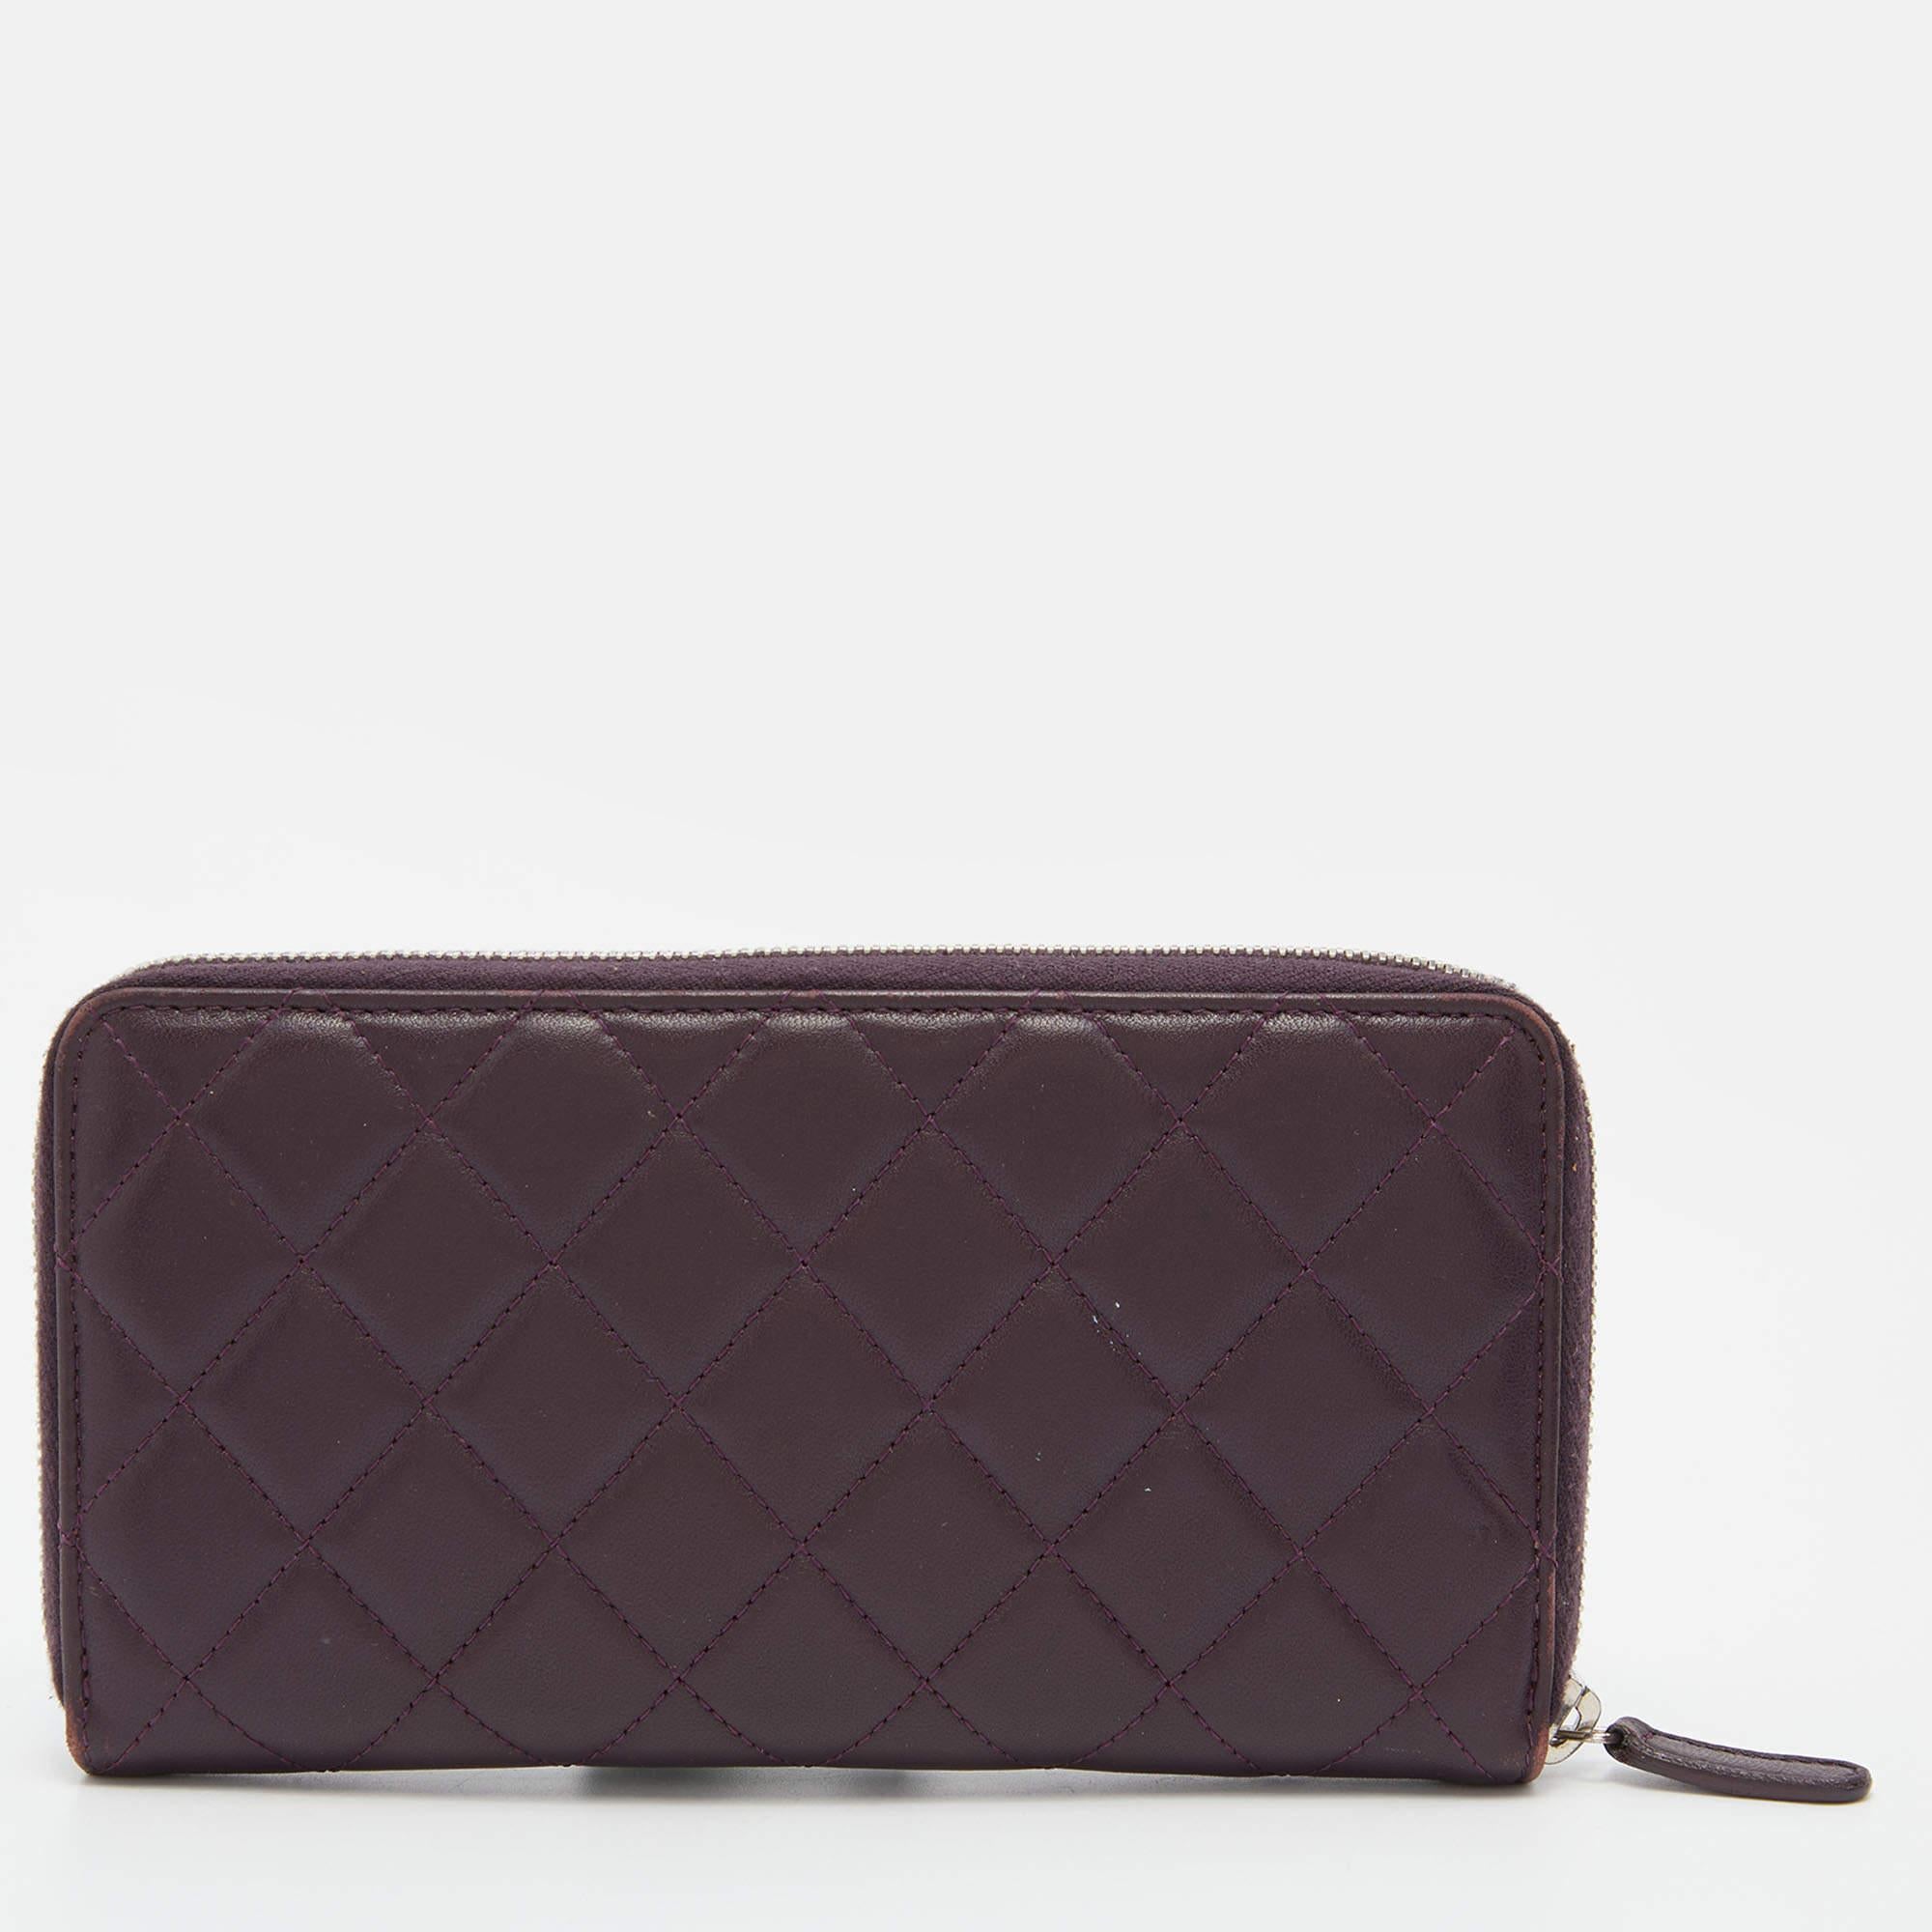 This Chanel wallet is carefully crafted to offer you a luxurious accessory you will cherish. It is marked by high quality and enduring appeal. Invest in it today!

Includes: Branded Box